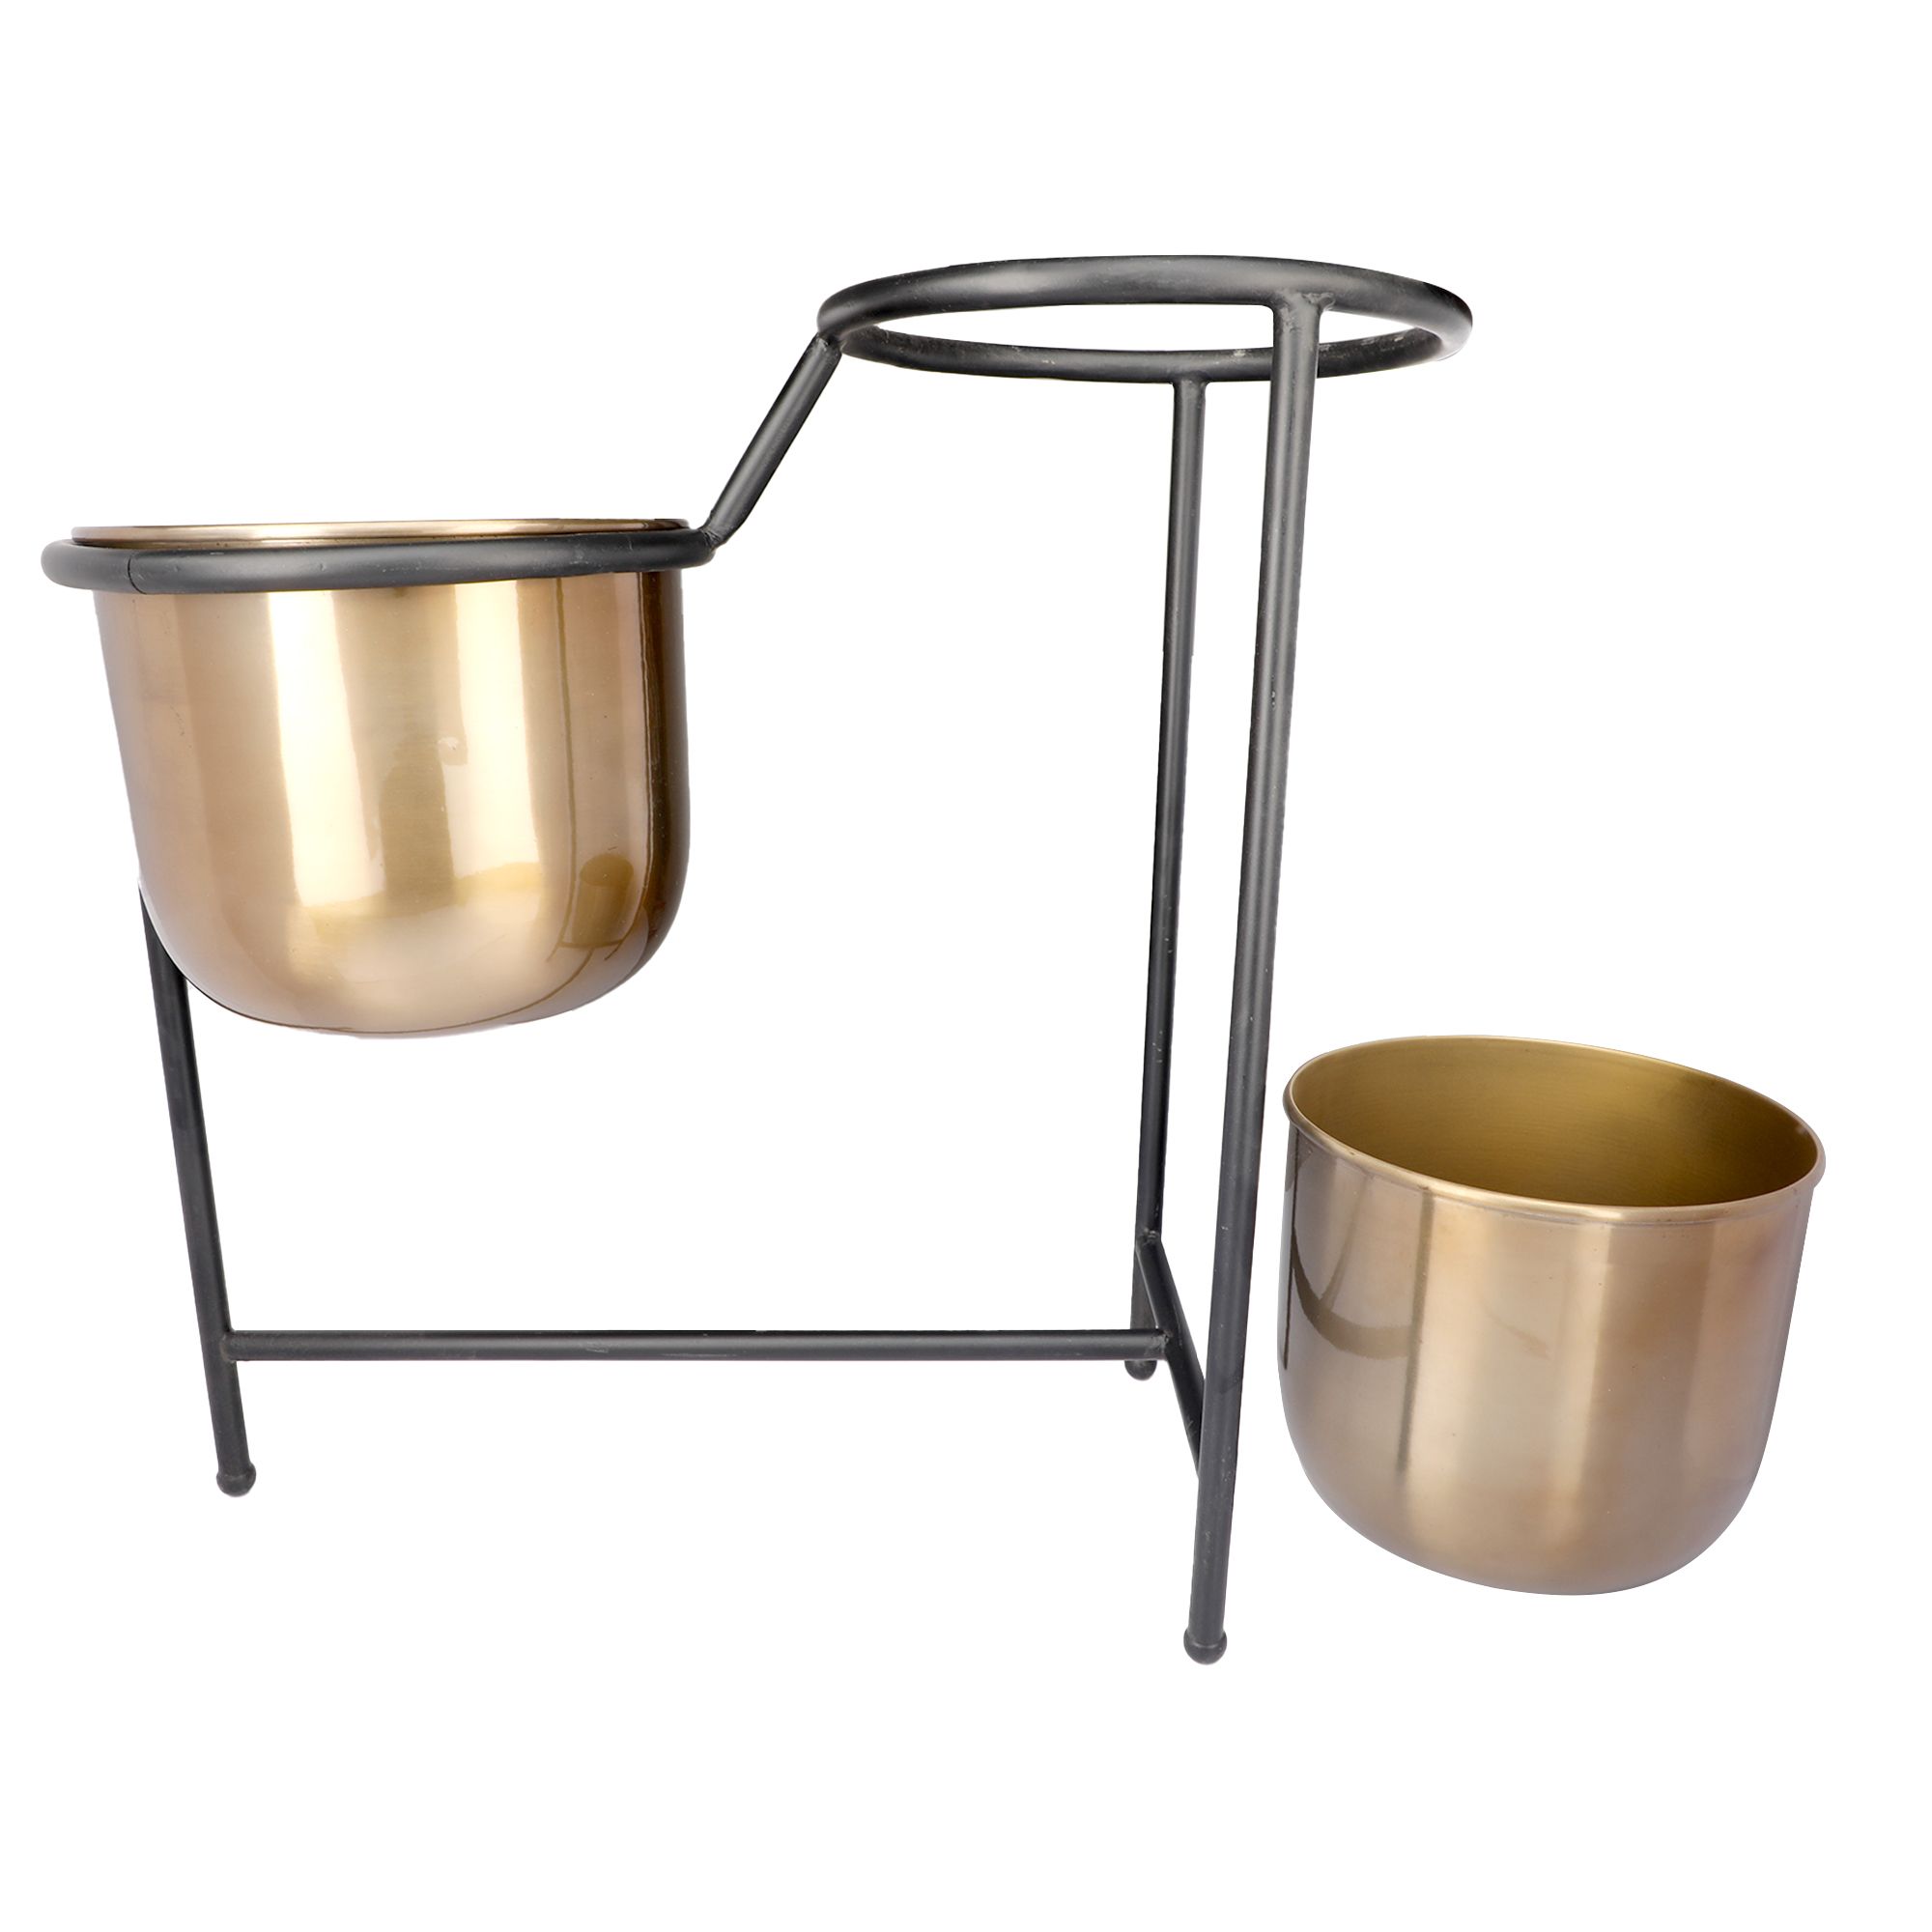 Dual Indoor Planter Pot with Stand